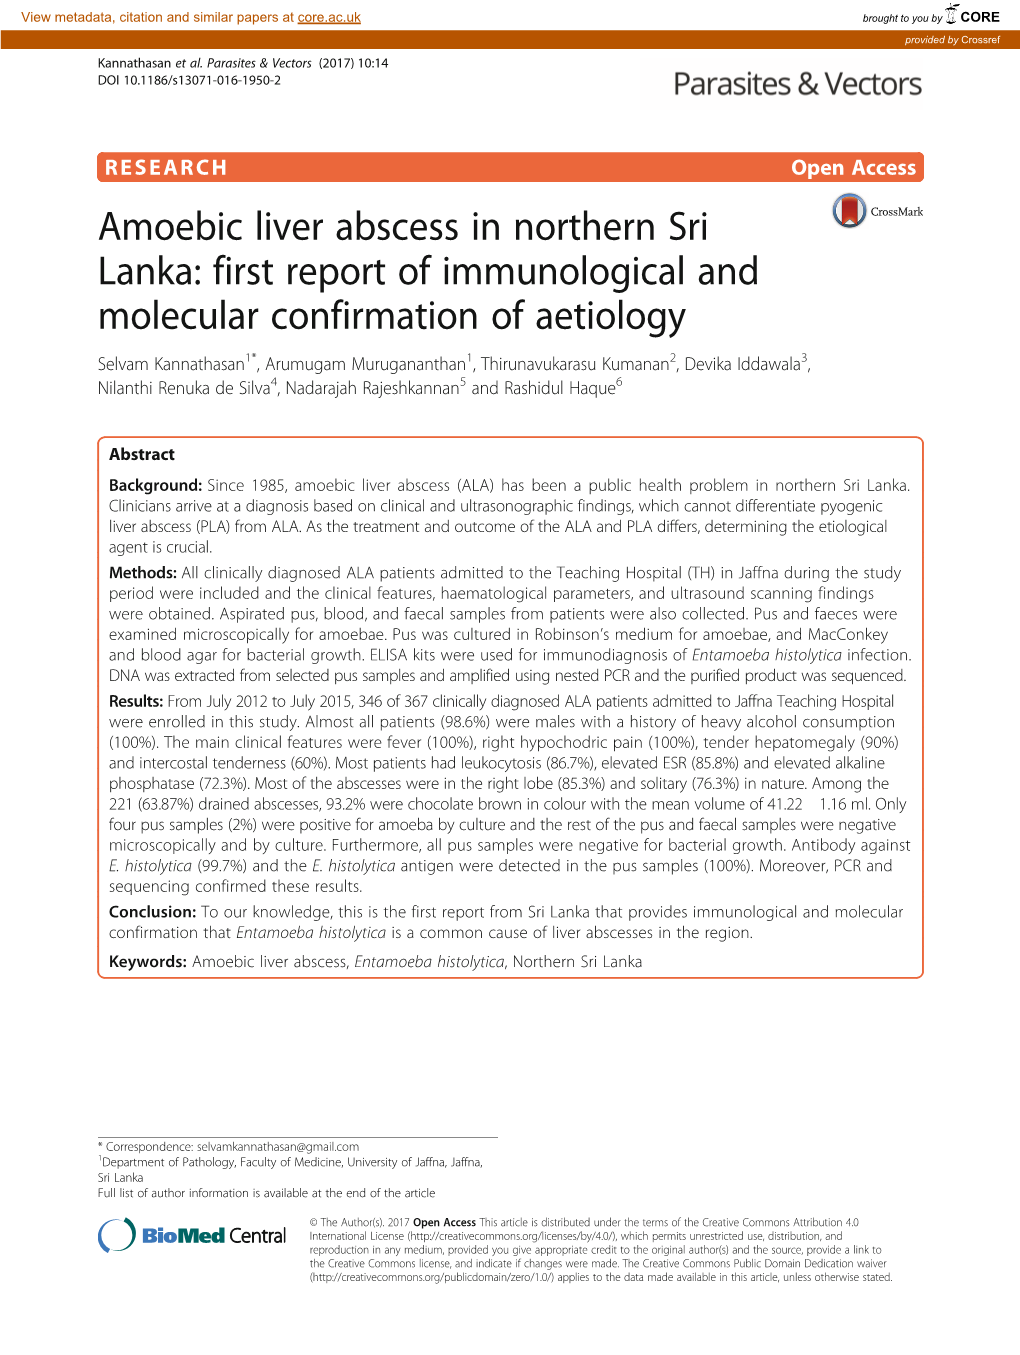 Amoebic Liver Abscess in Northern Sri Lanka: First Report of Immunological and Molecular Confirmation of Aetiology